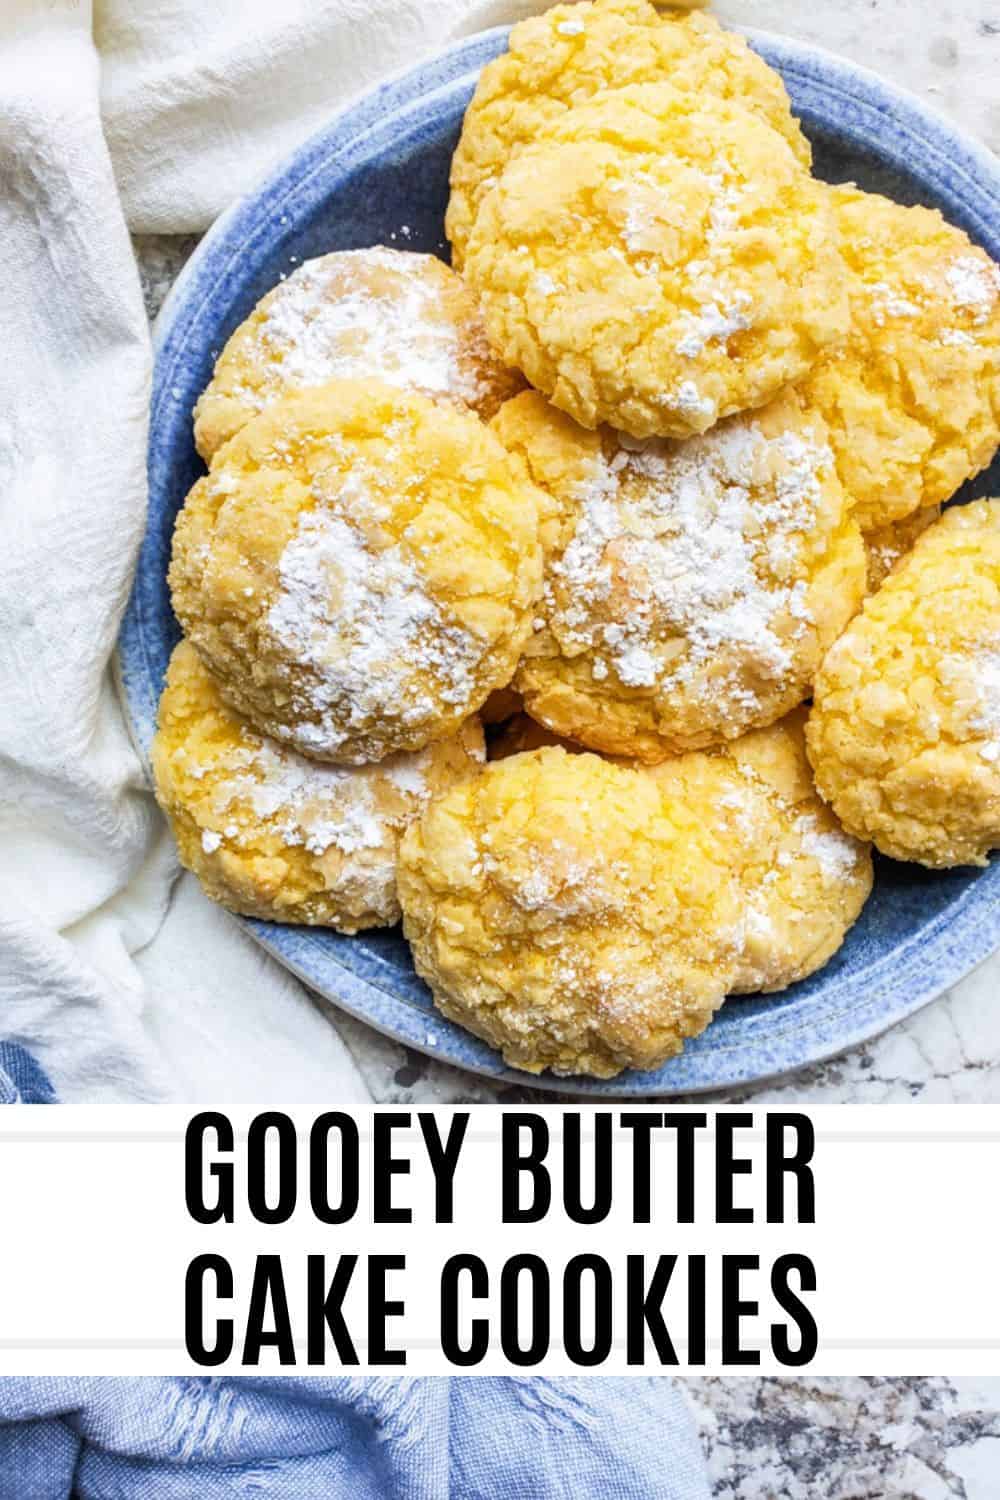 St. Louis Style Gooey Butter Cake Cookies Recipe - Erhardts Eat